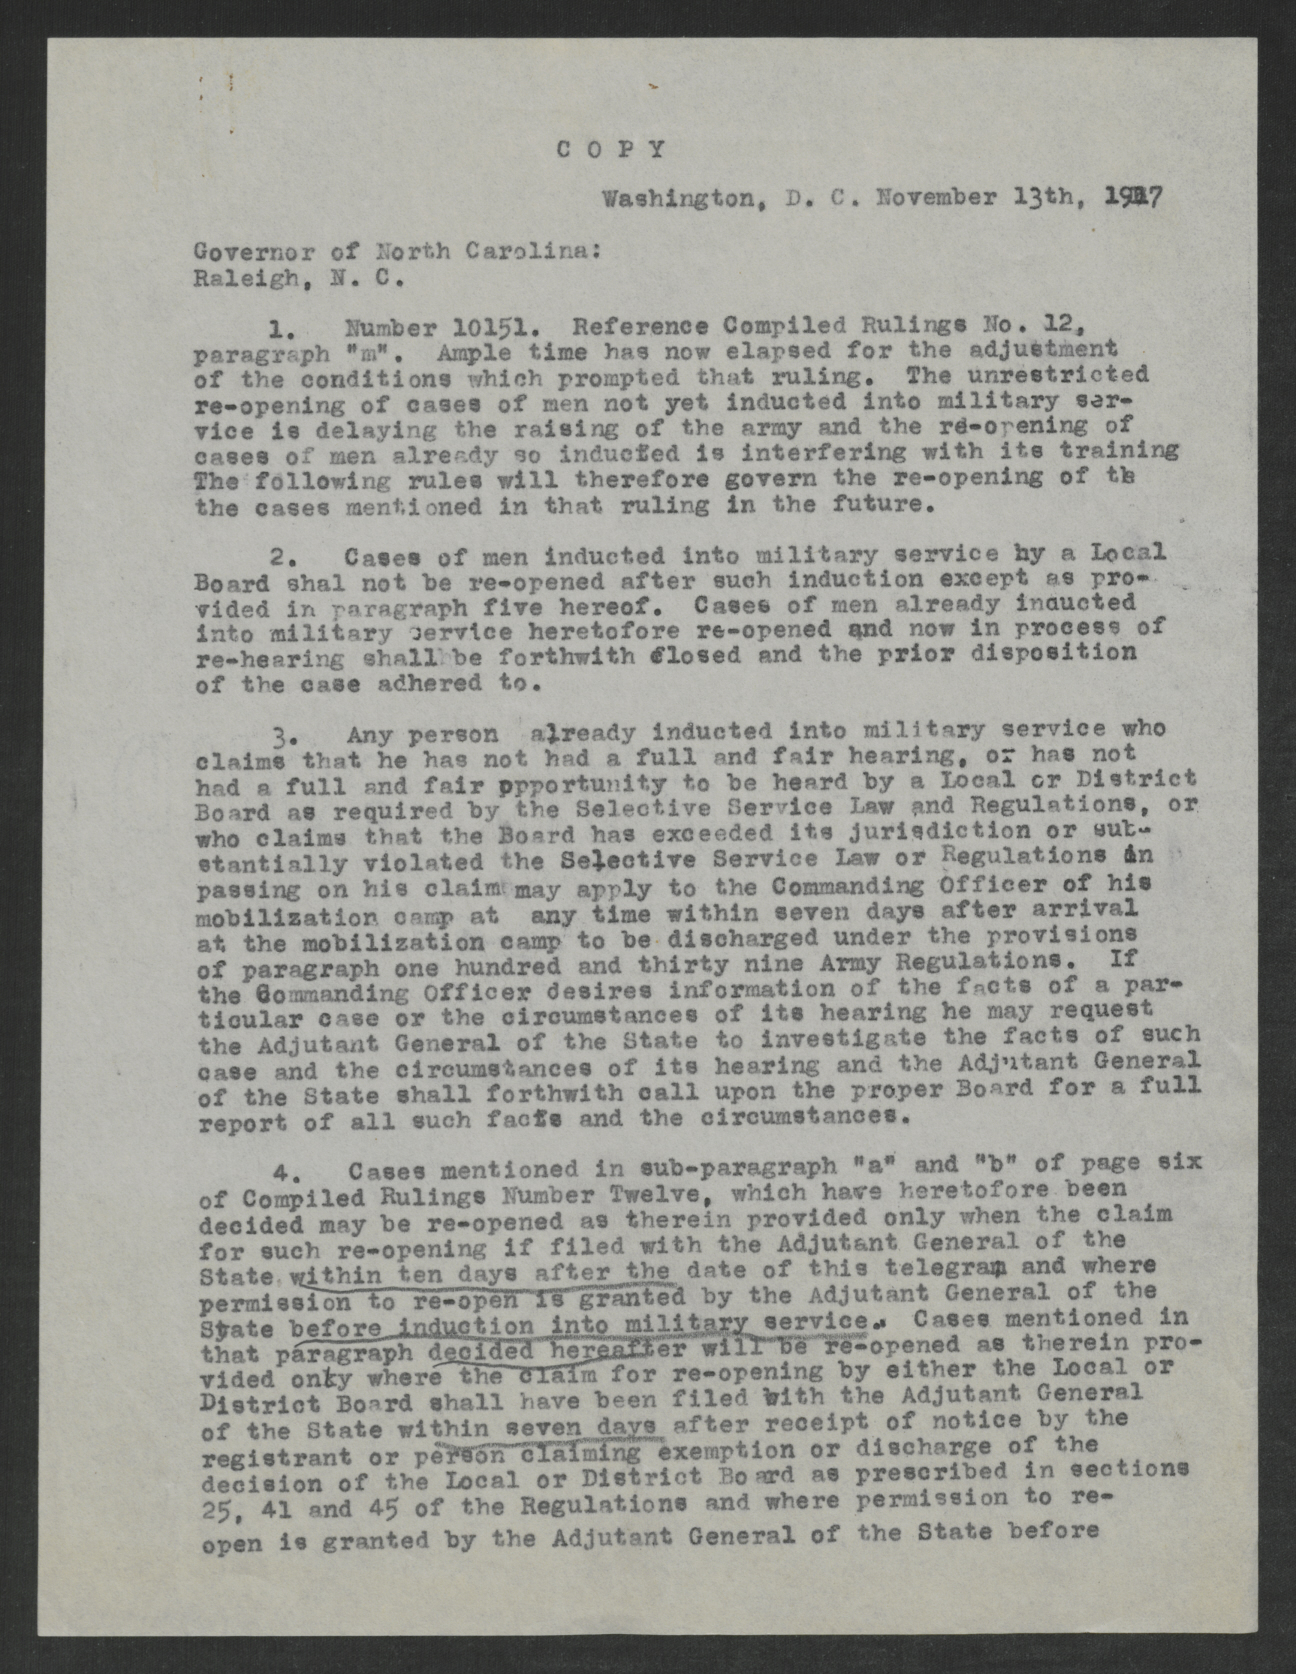 Letter from Enoch H. Crowder to Thomas W. Bickett, November 13, 1917, page 1